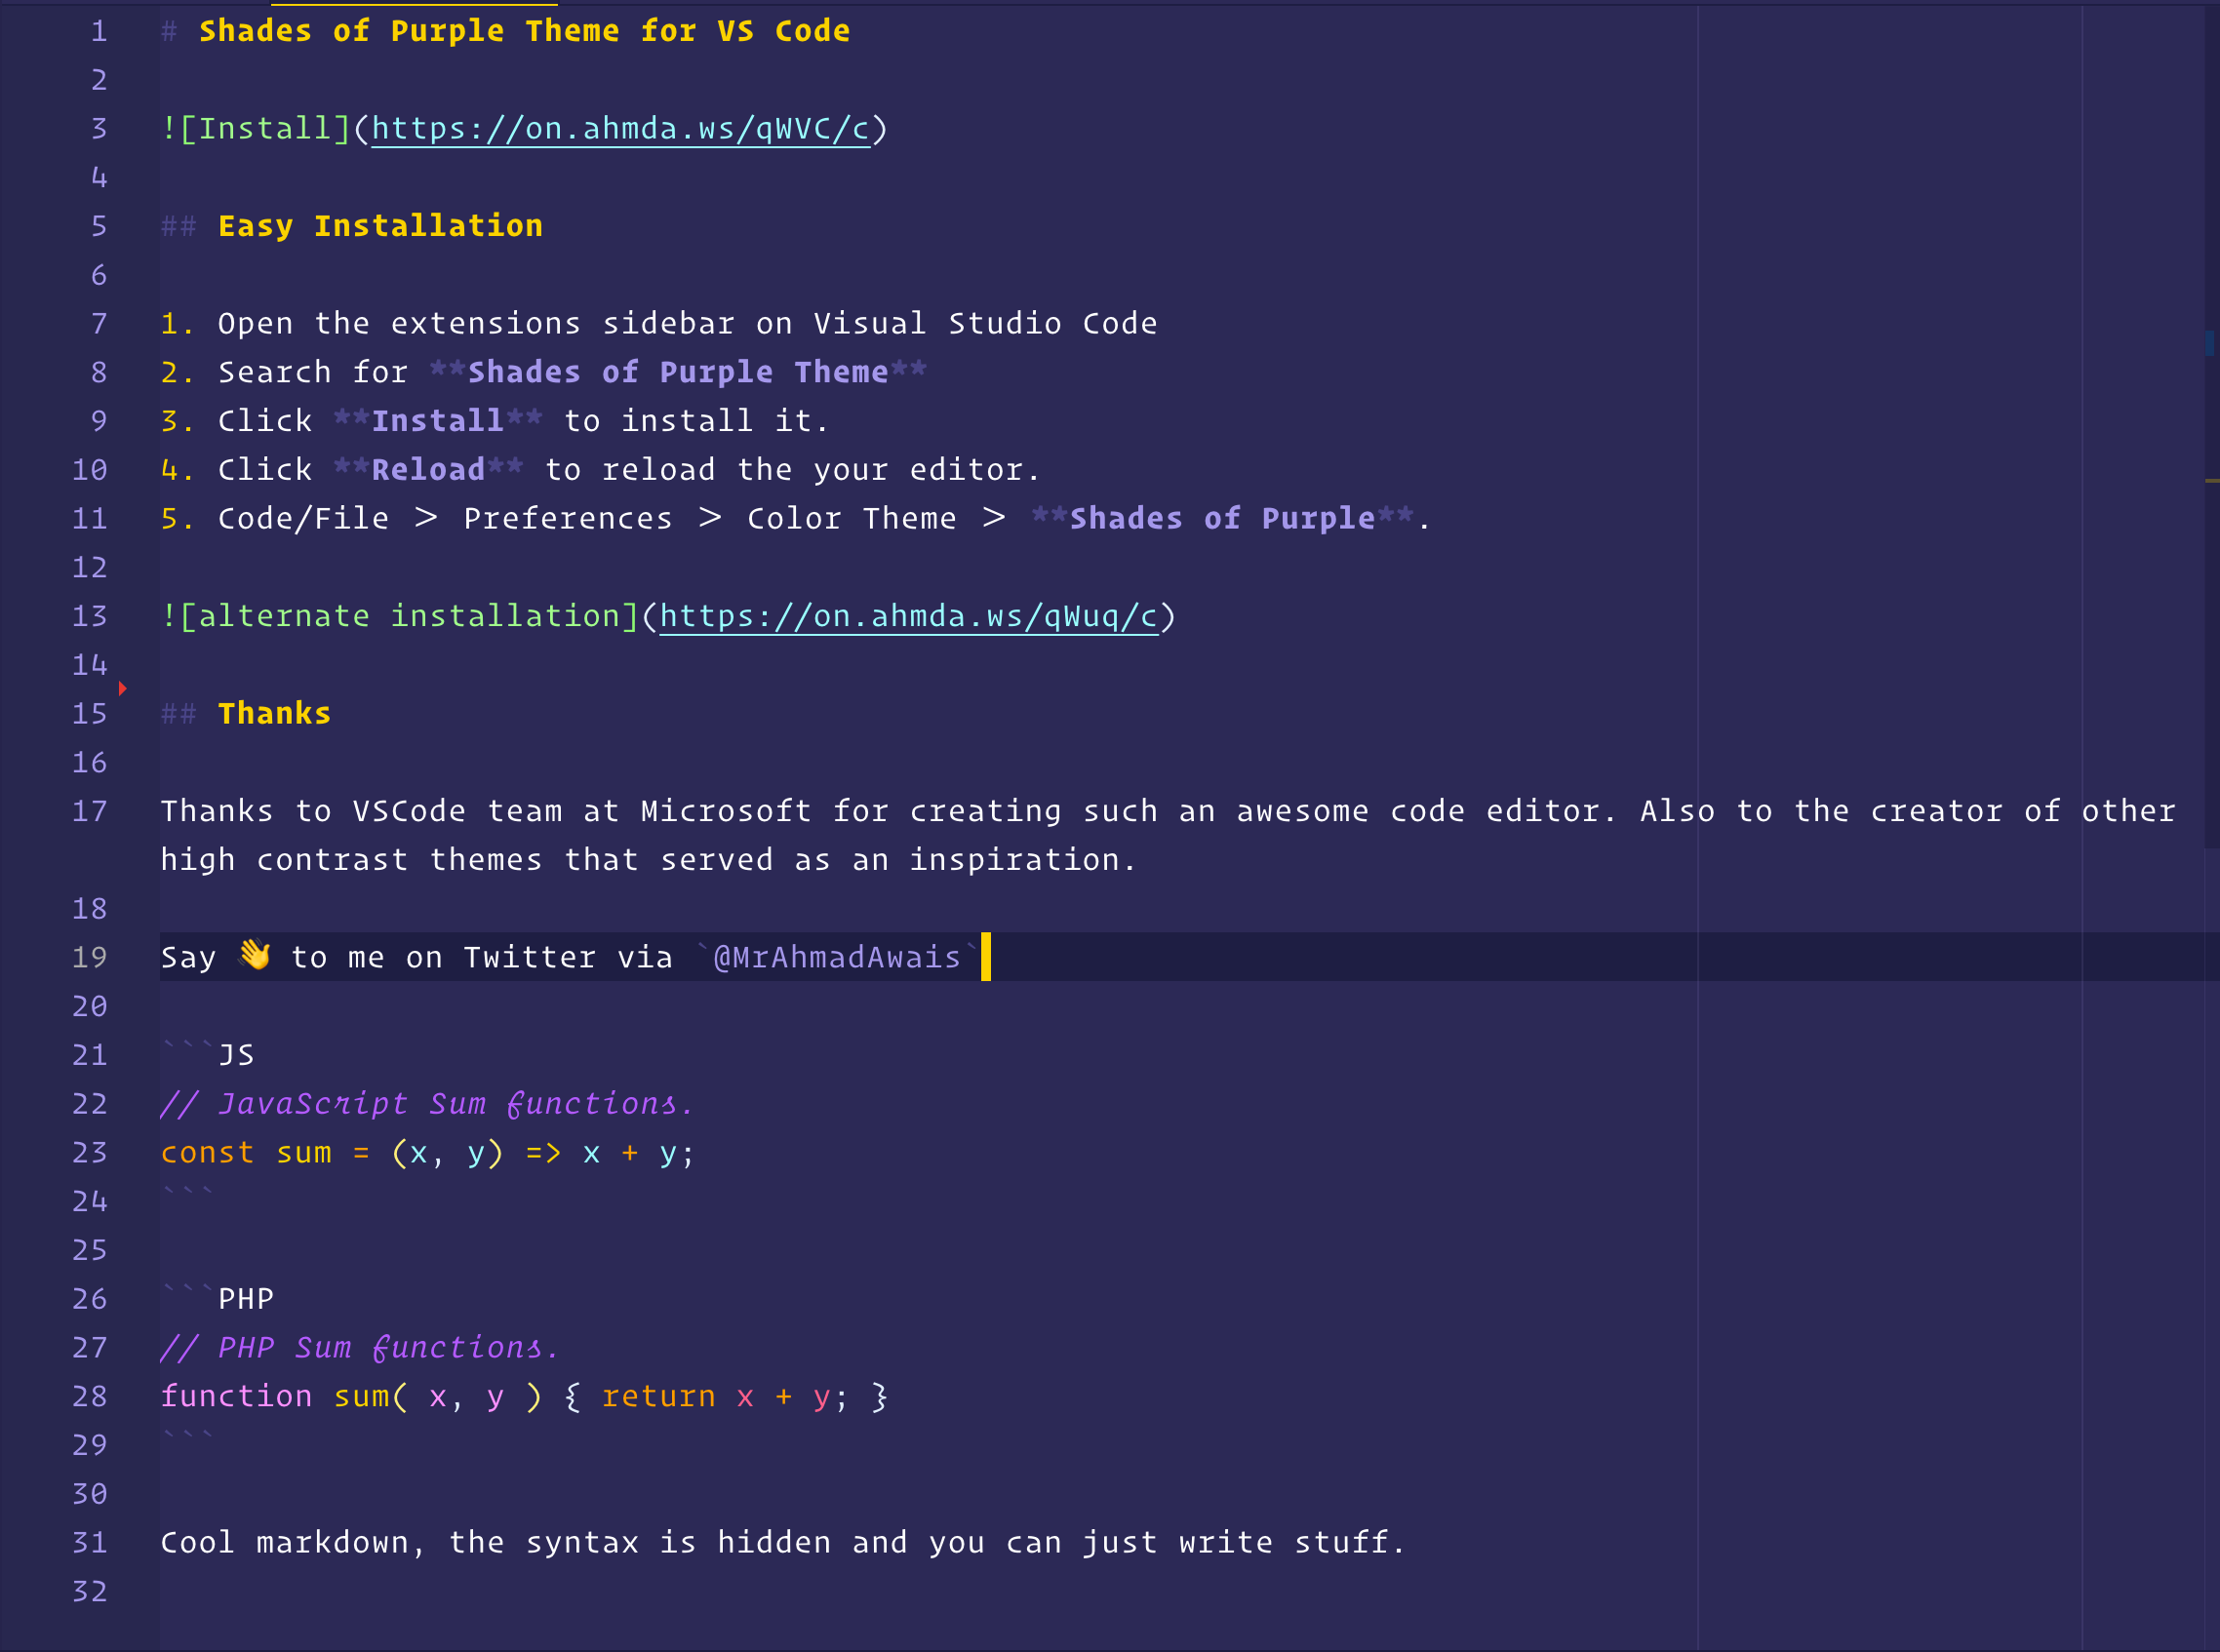 Shades of Purple for VS Code